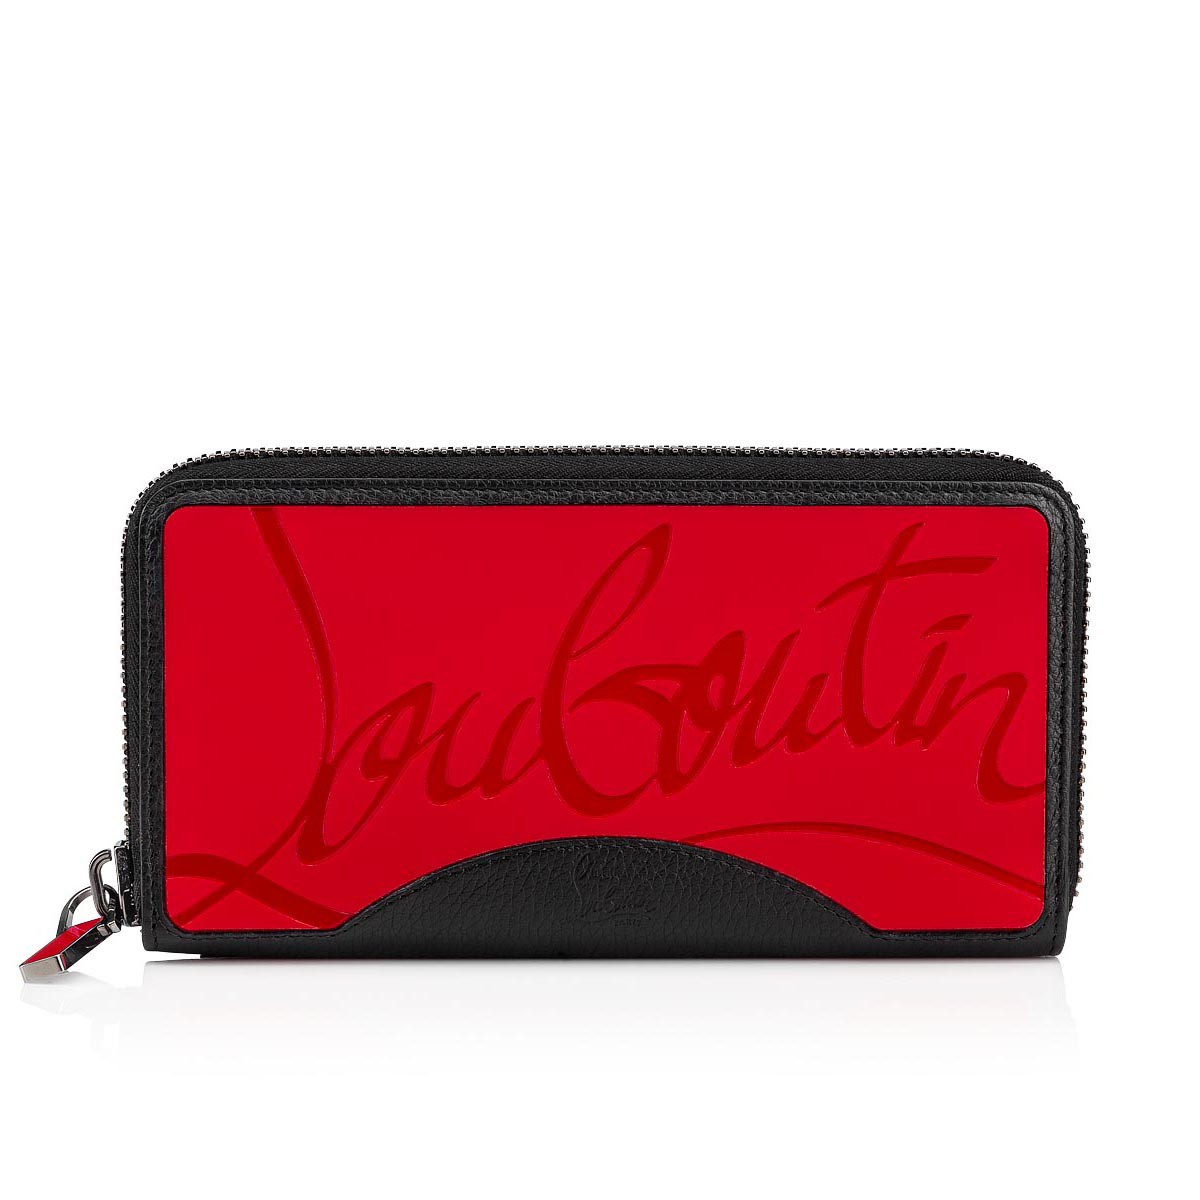 Panettone wallet Red Calf - 包款- Christian Louboutin